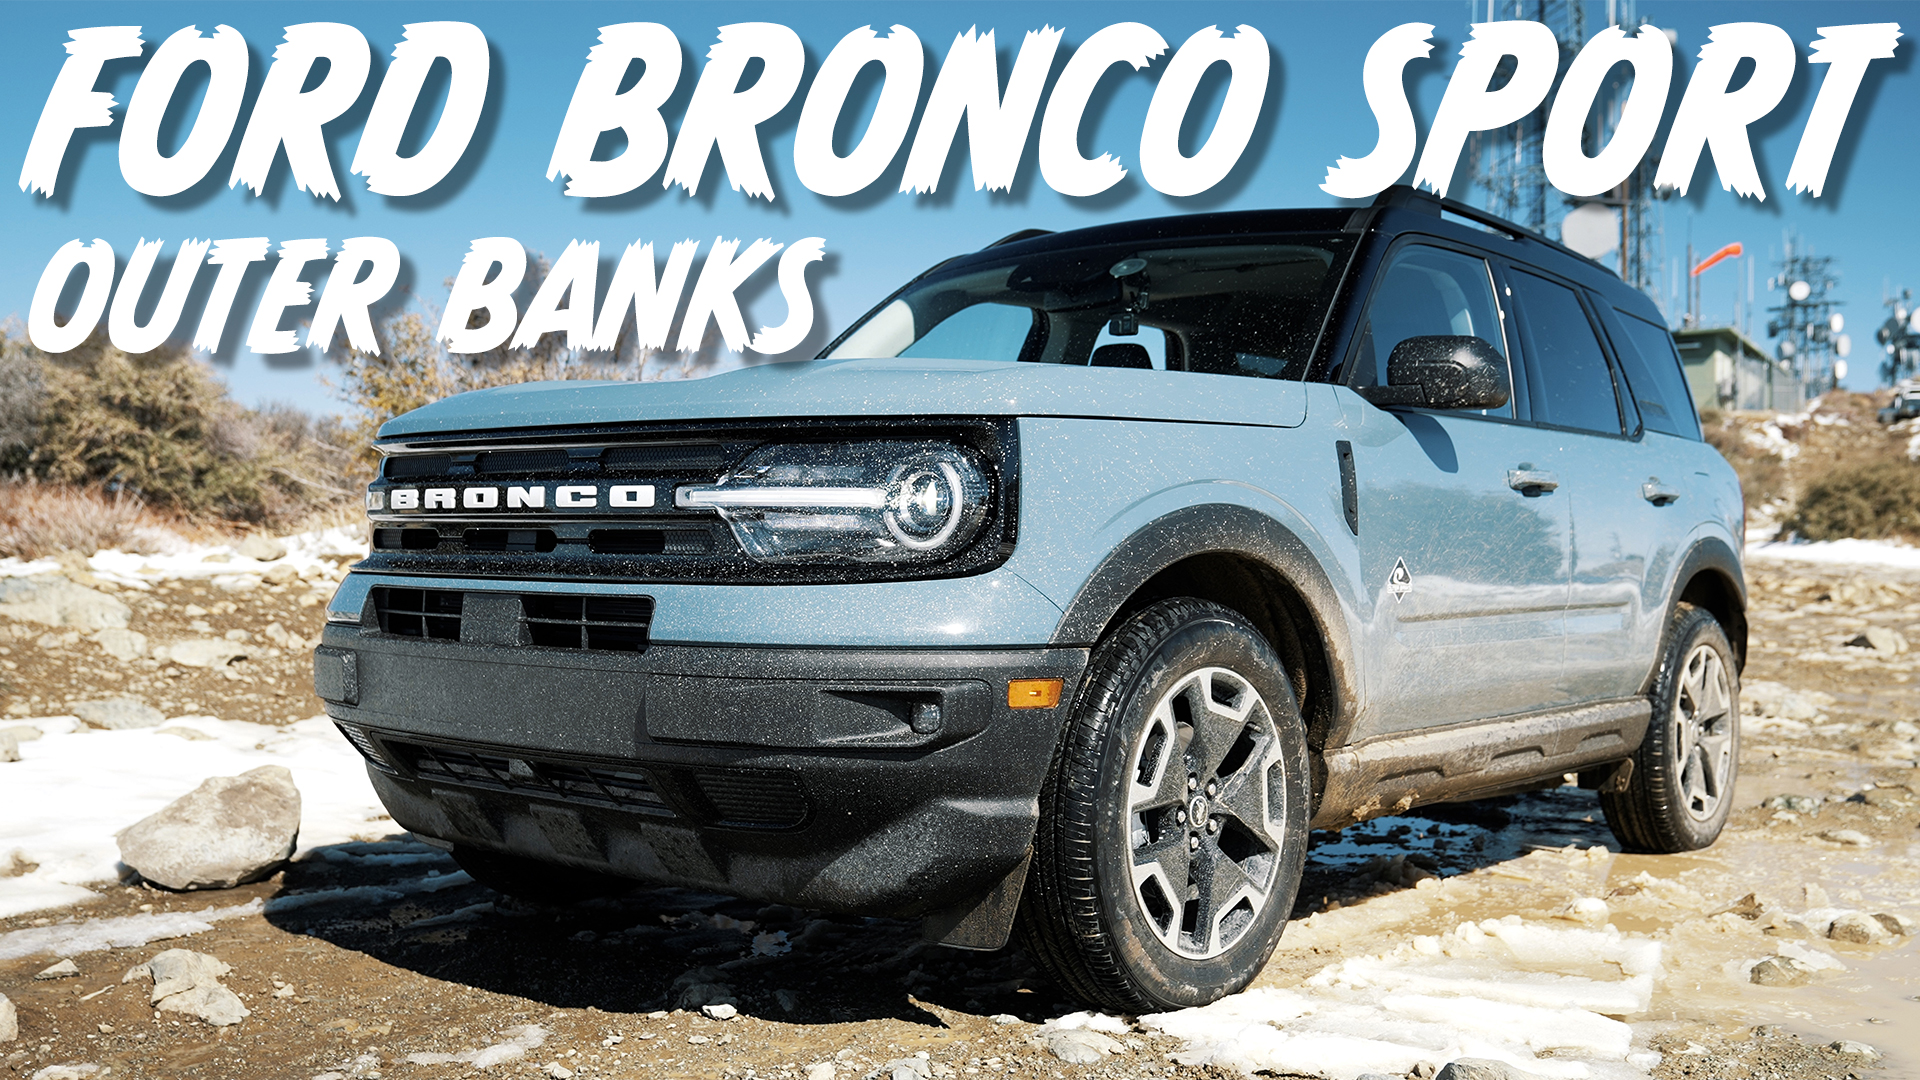 Ford Bronco Sport off road